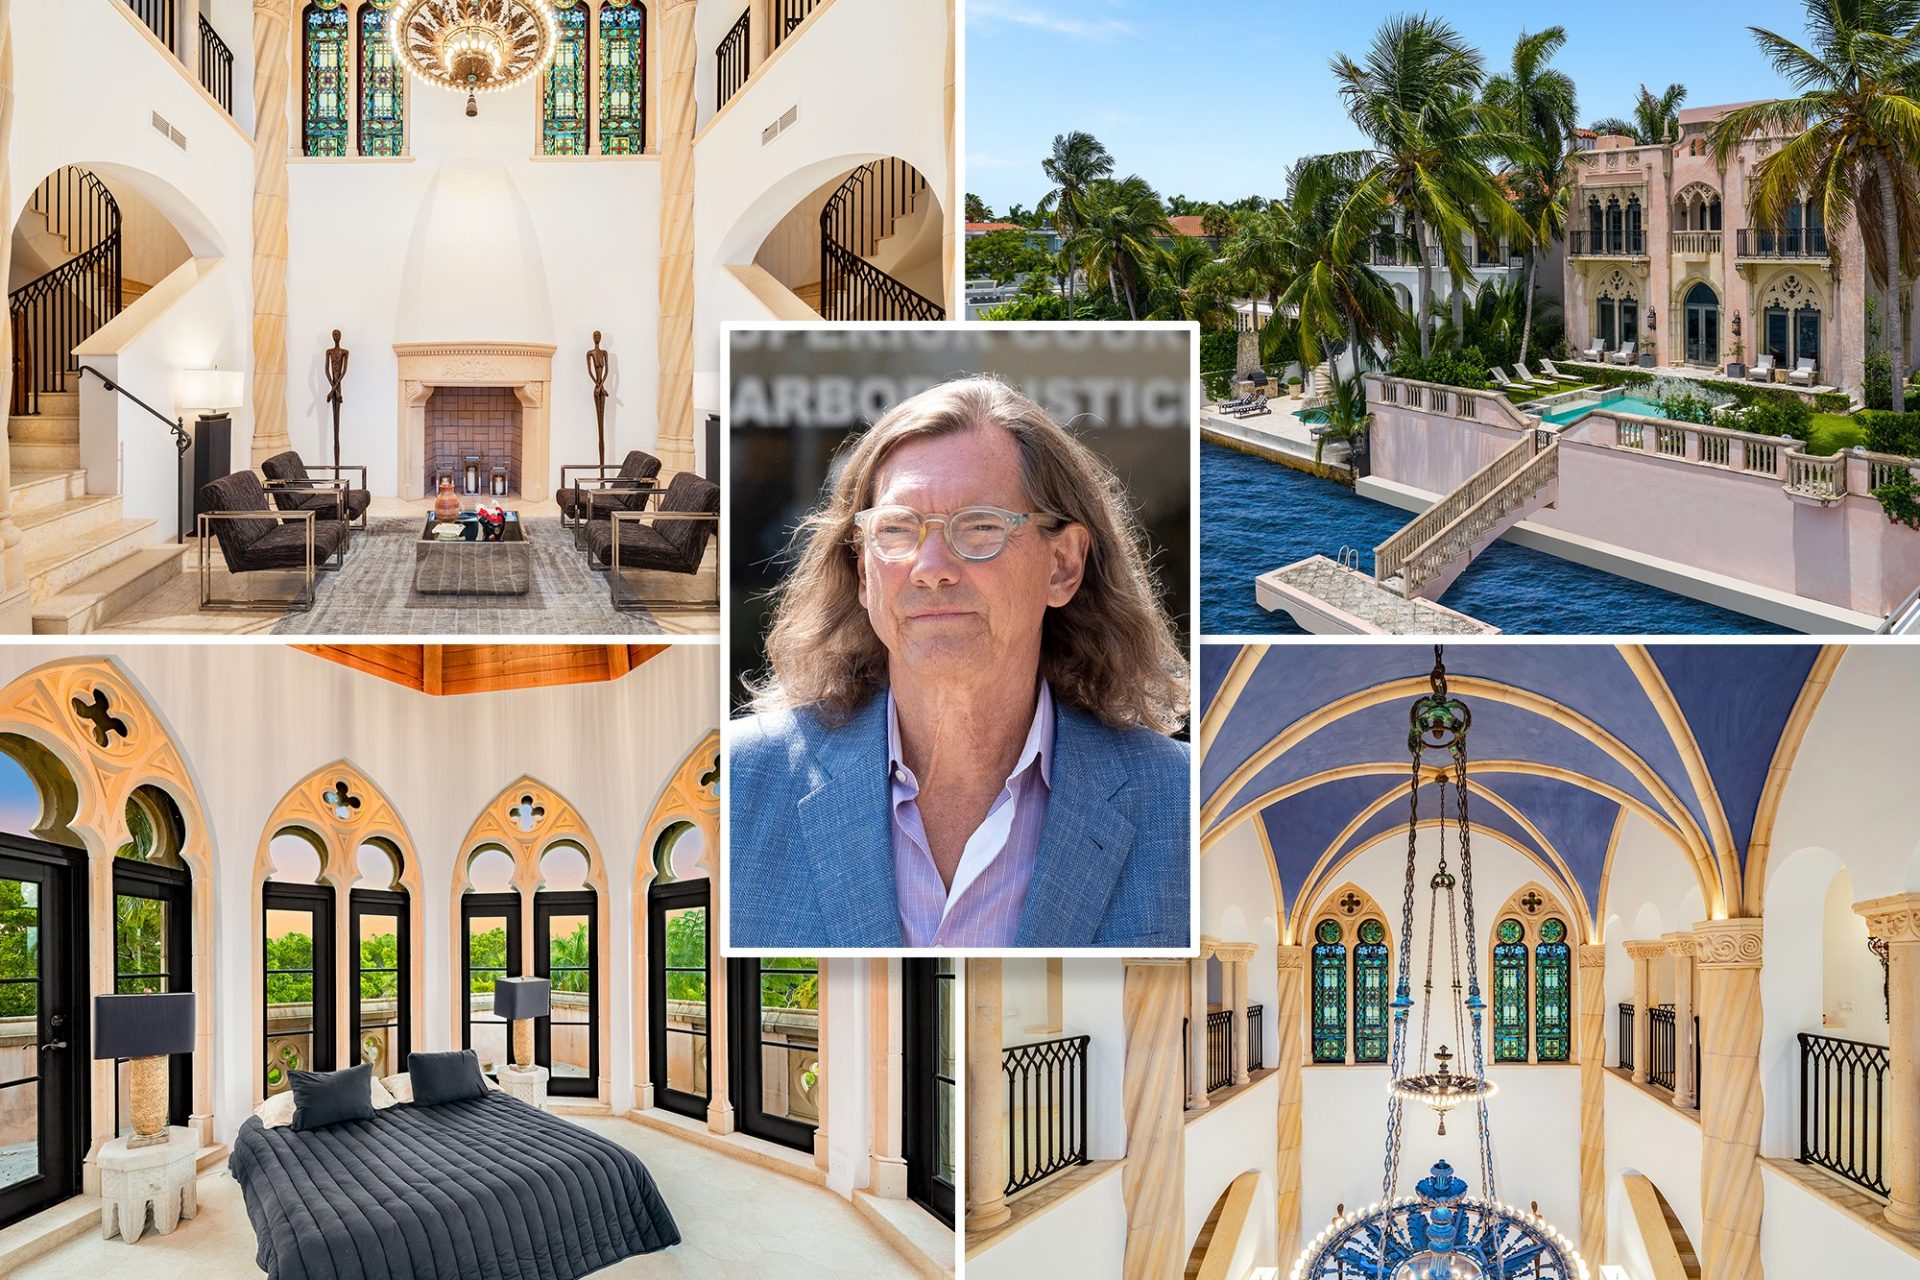 ‘Marrying Tens of millions’ star sells off $25M in luxe homes amid sex assault charges